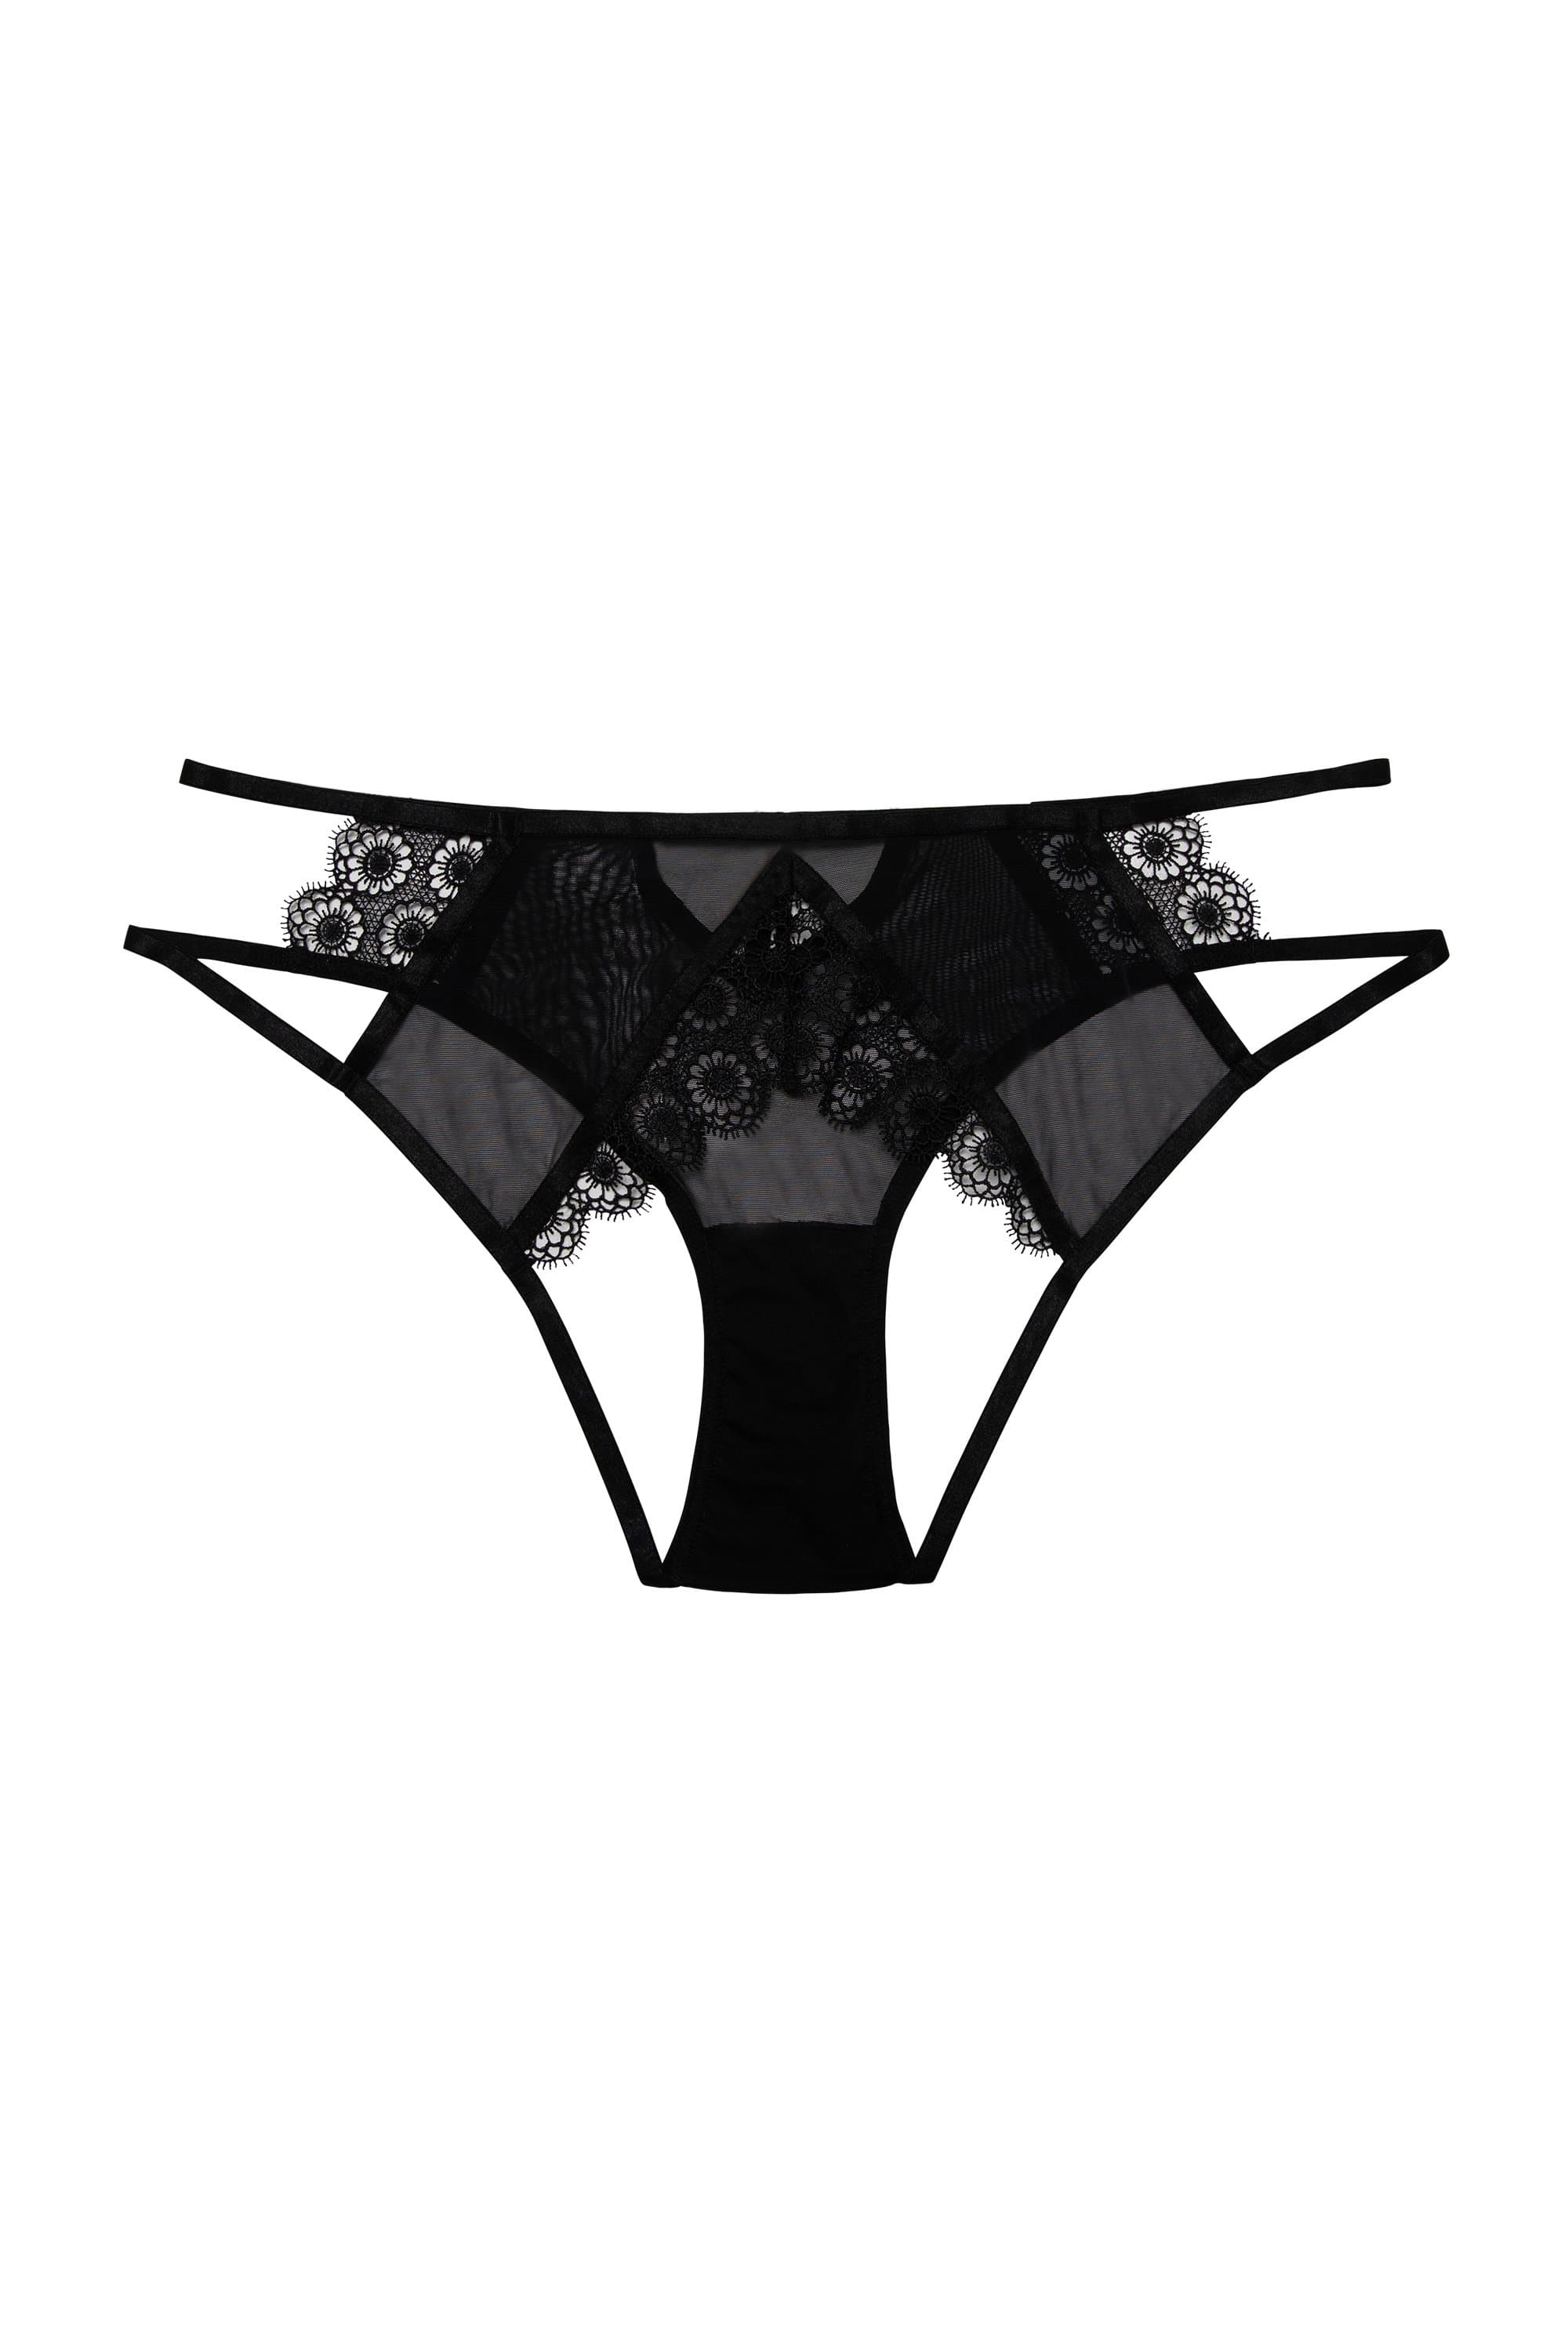 Daisy Black Embroidery Cut Out Brief